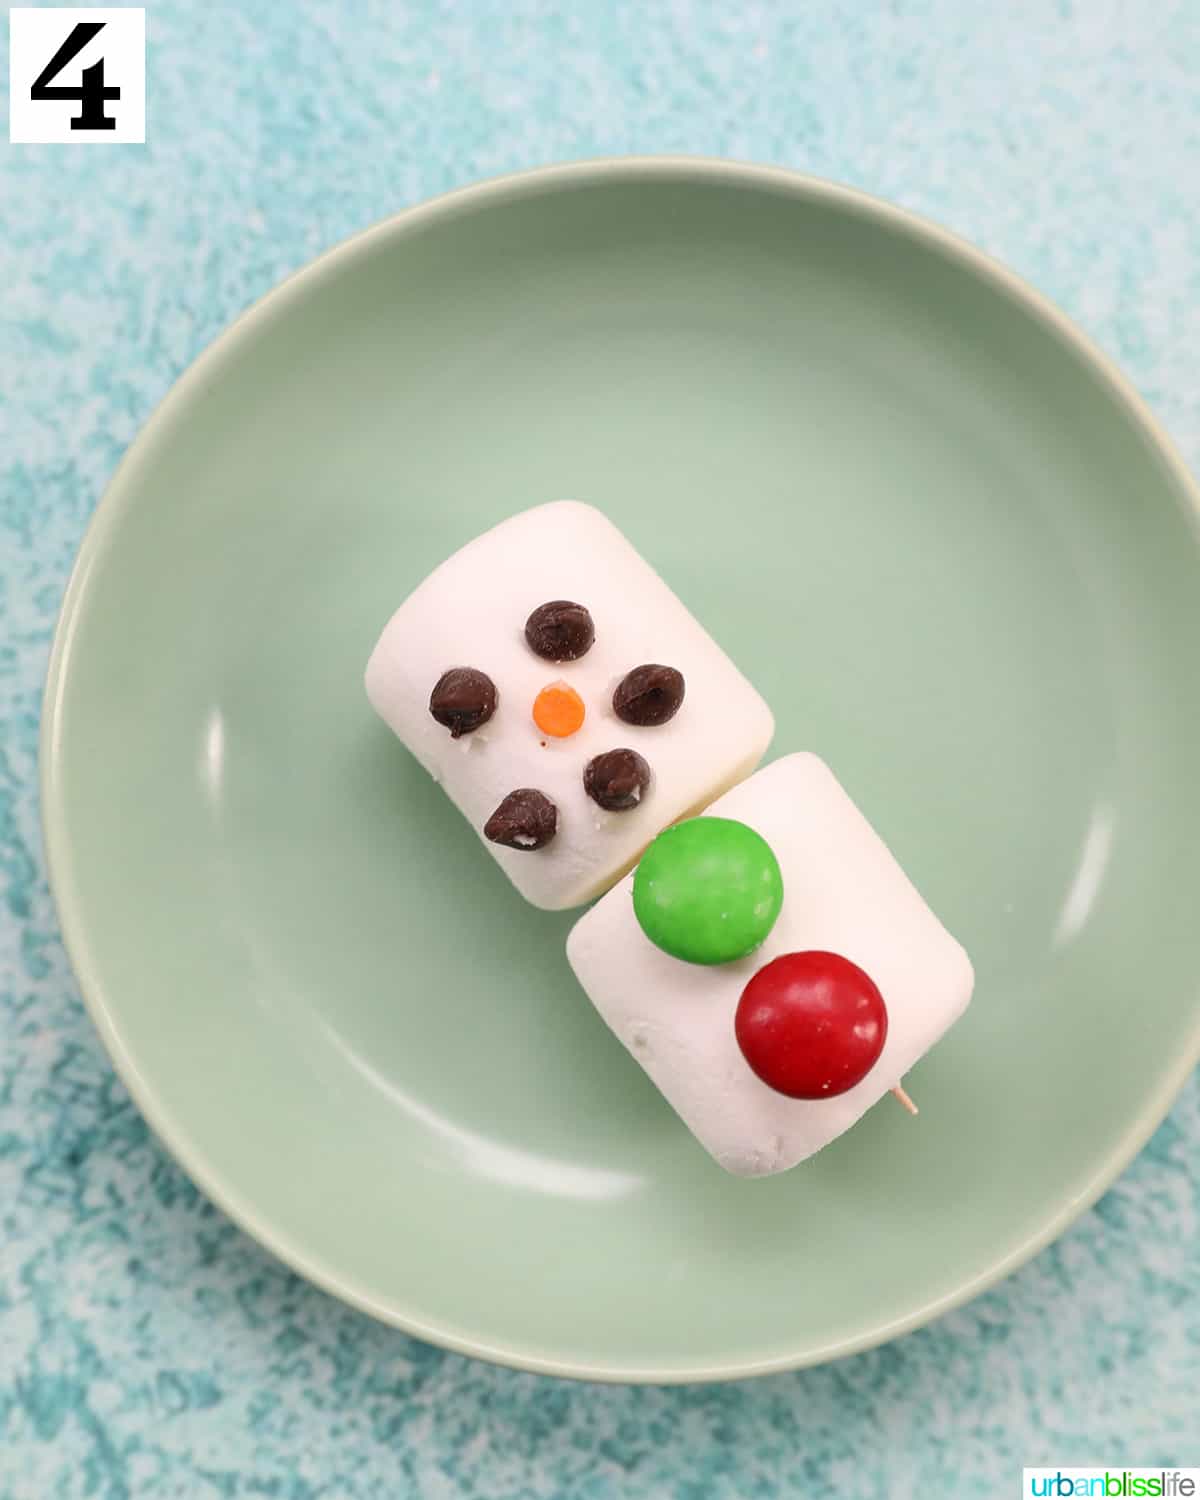 marshmallows with chocolate chips for eyes and mouth on a green plate.